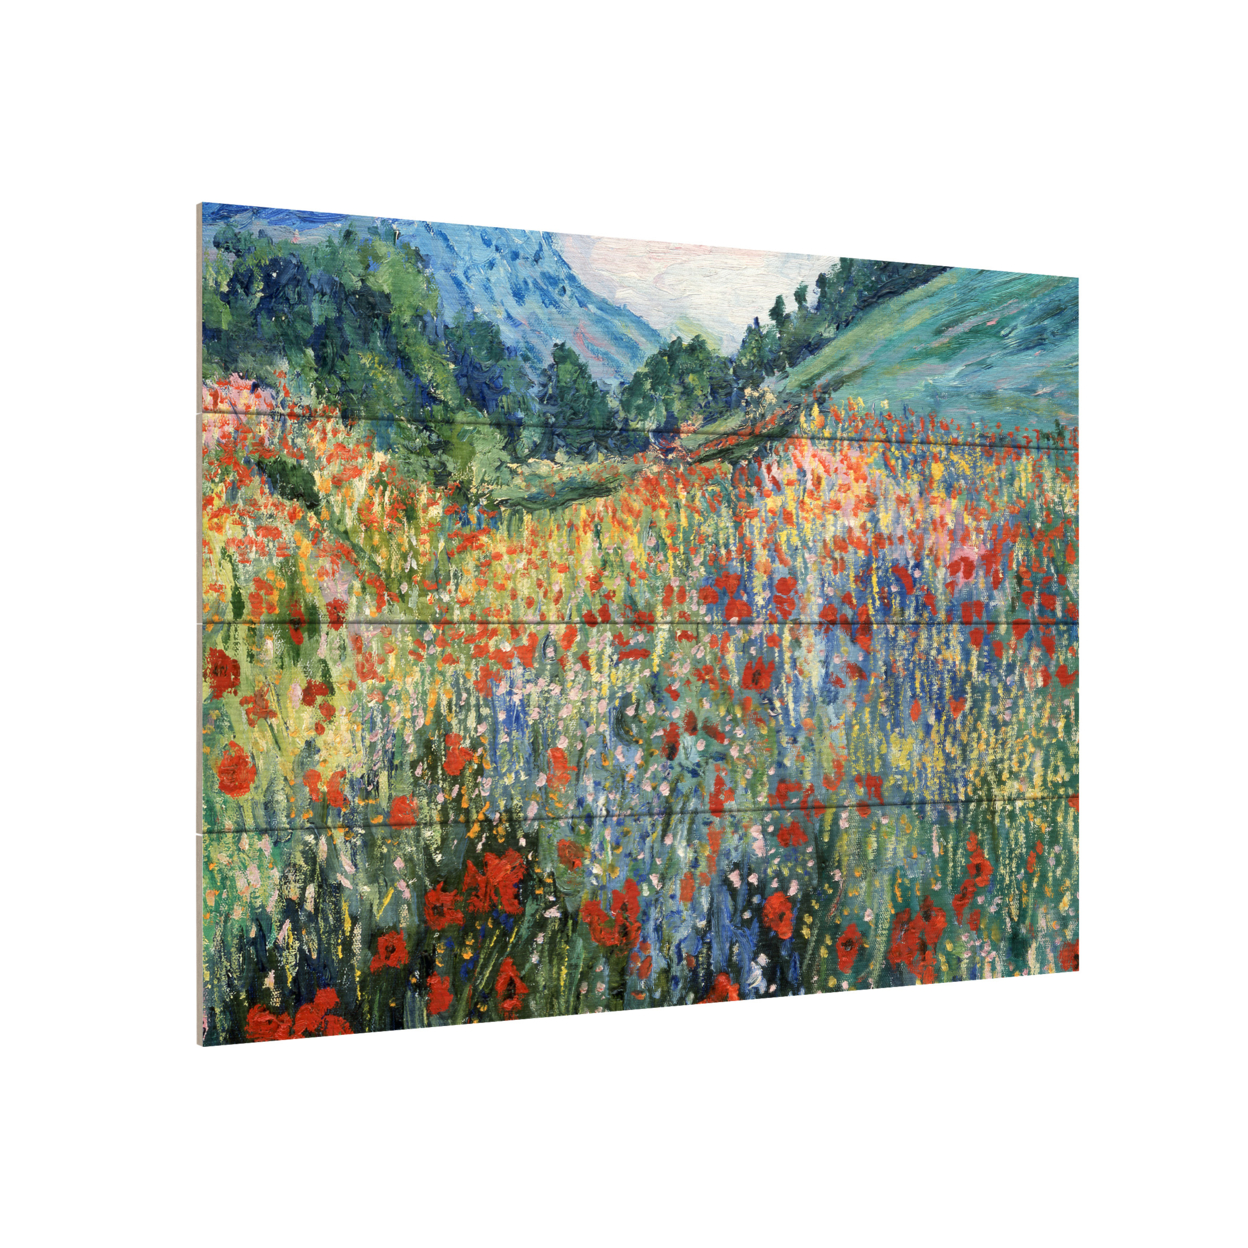 Wall Art 12 X 16 Inches Titled Field Of Wild Flowers Ready To Hang Printed On Wooden Planks